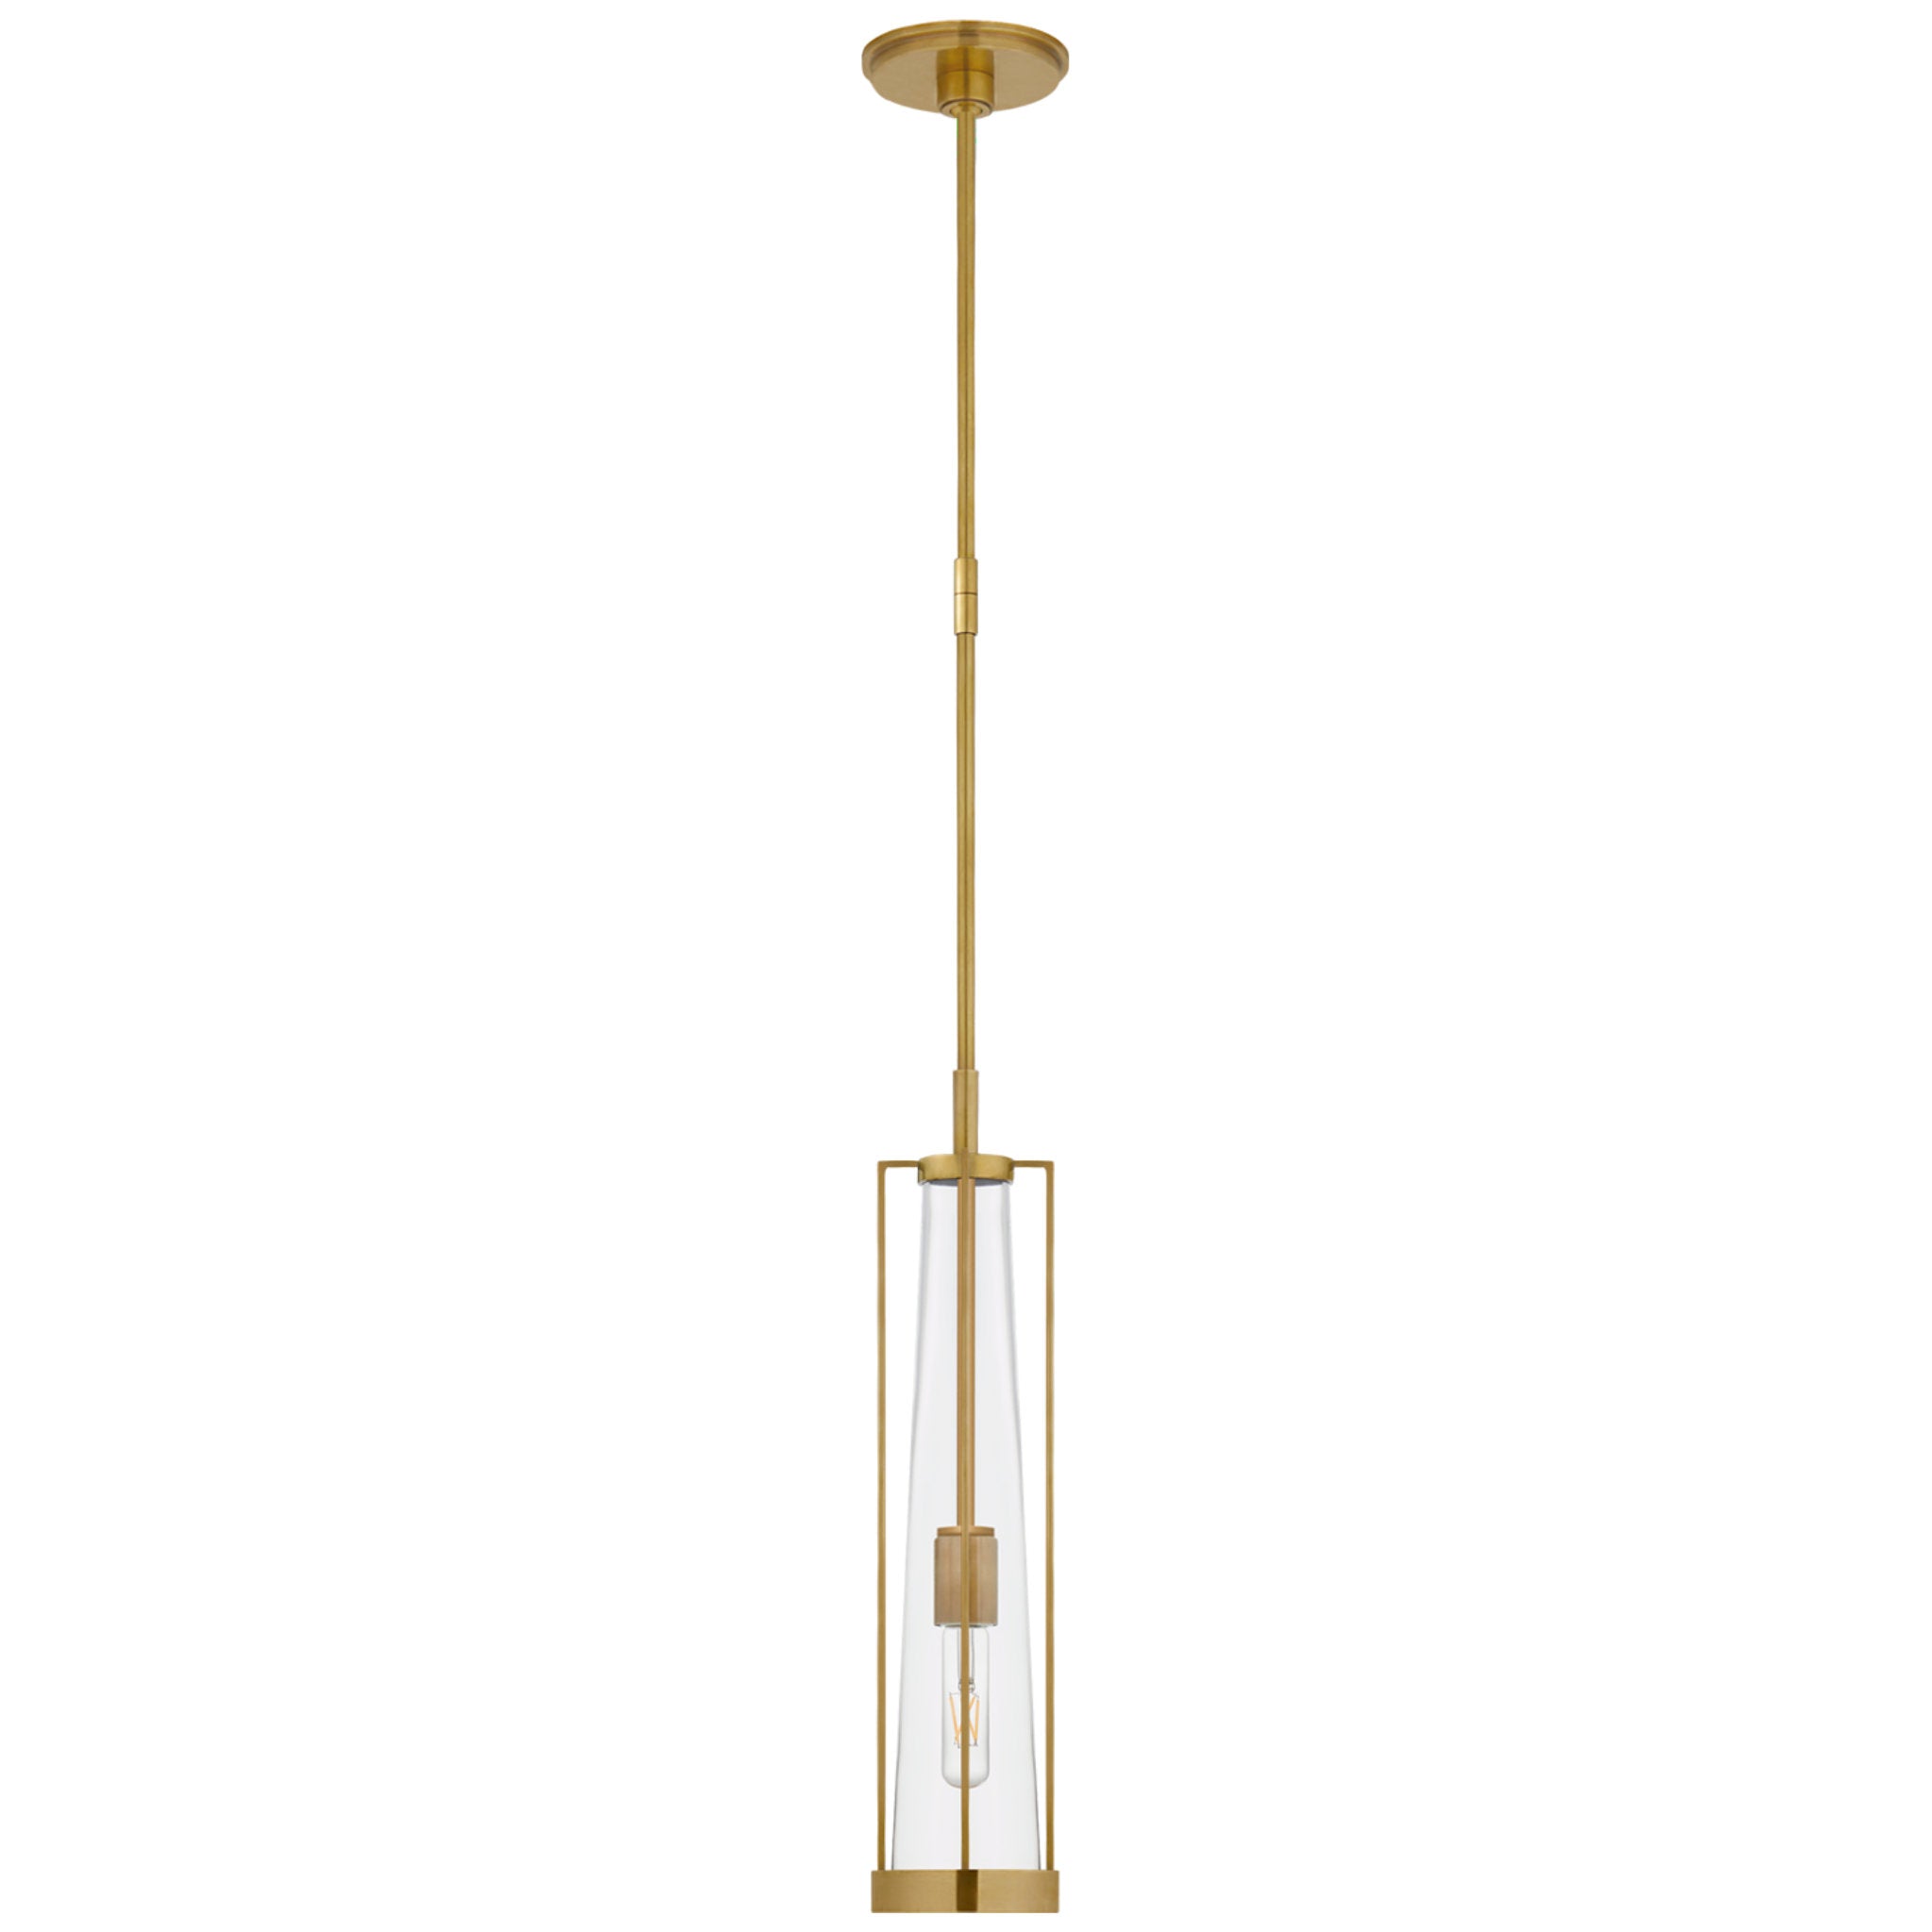 Thomas O'Brien Calix Tall Pendant in Hand-Rubbed Antique Brass with Clear Glass